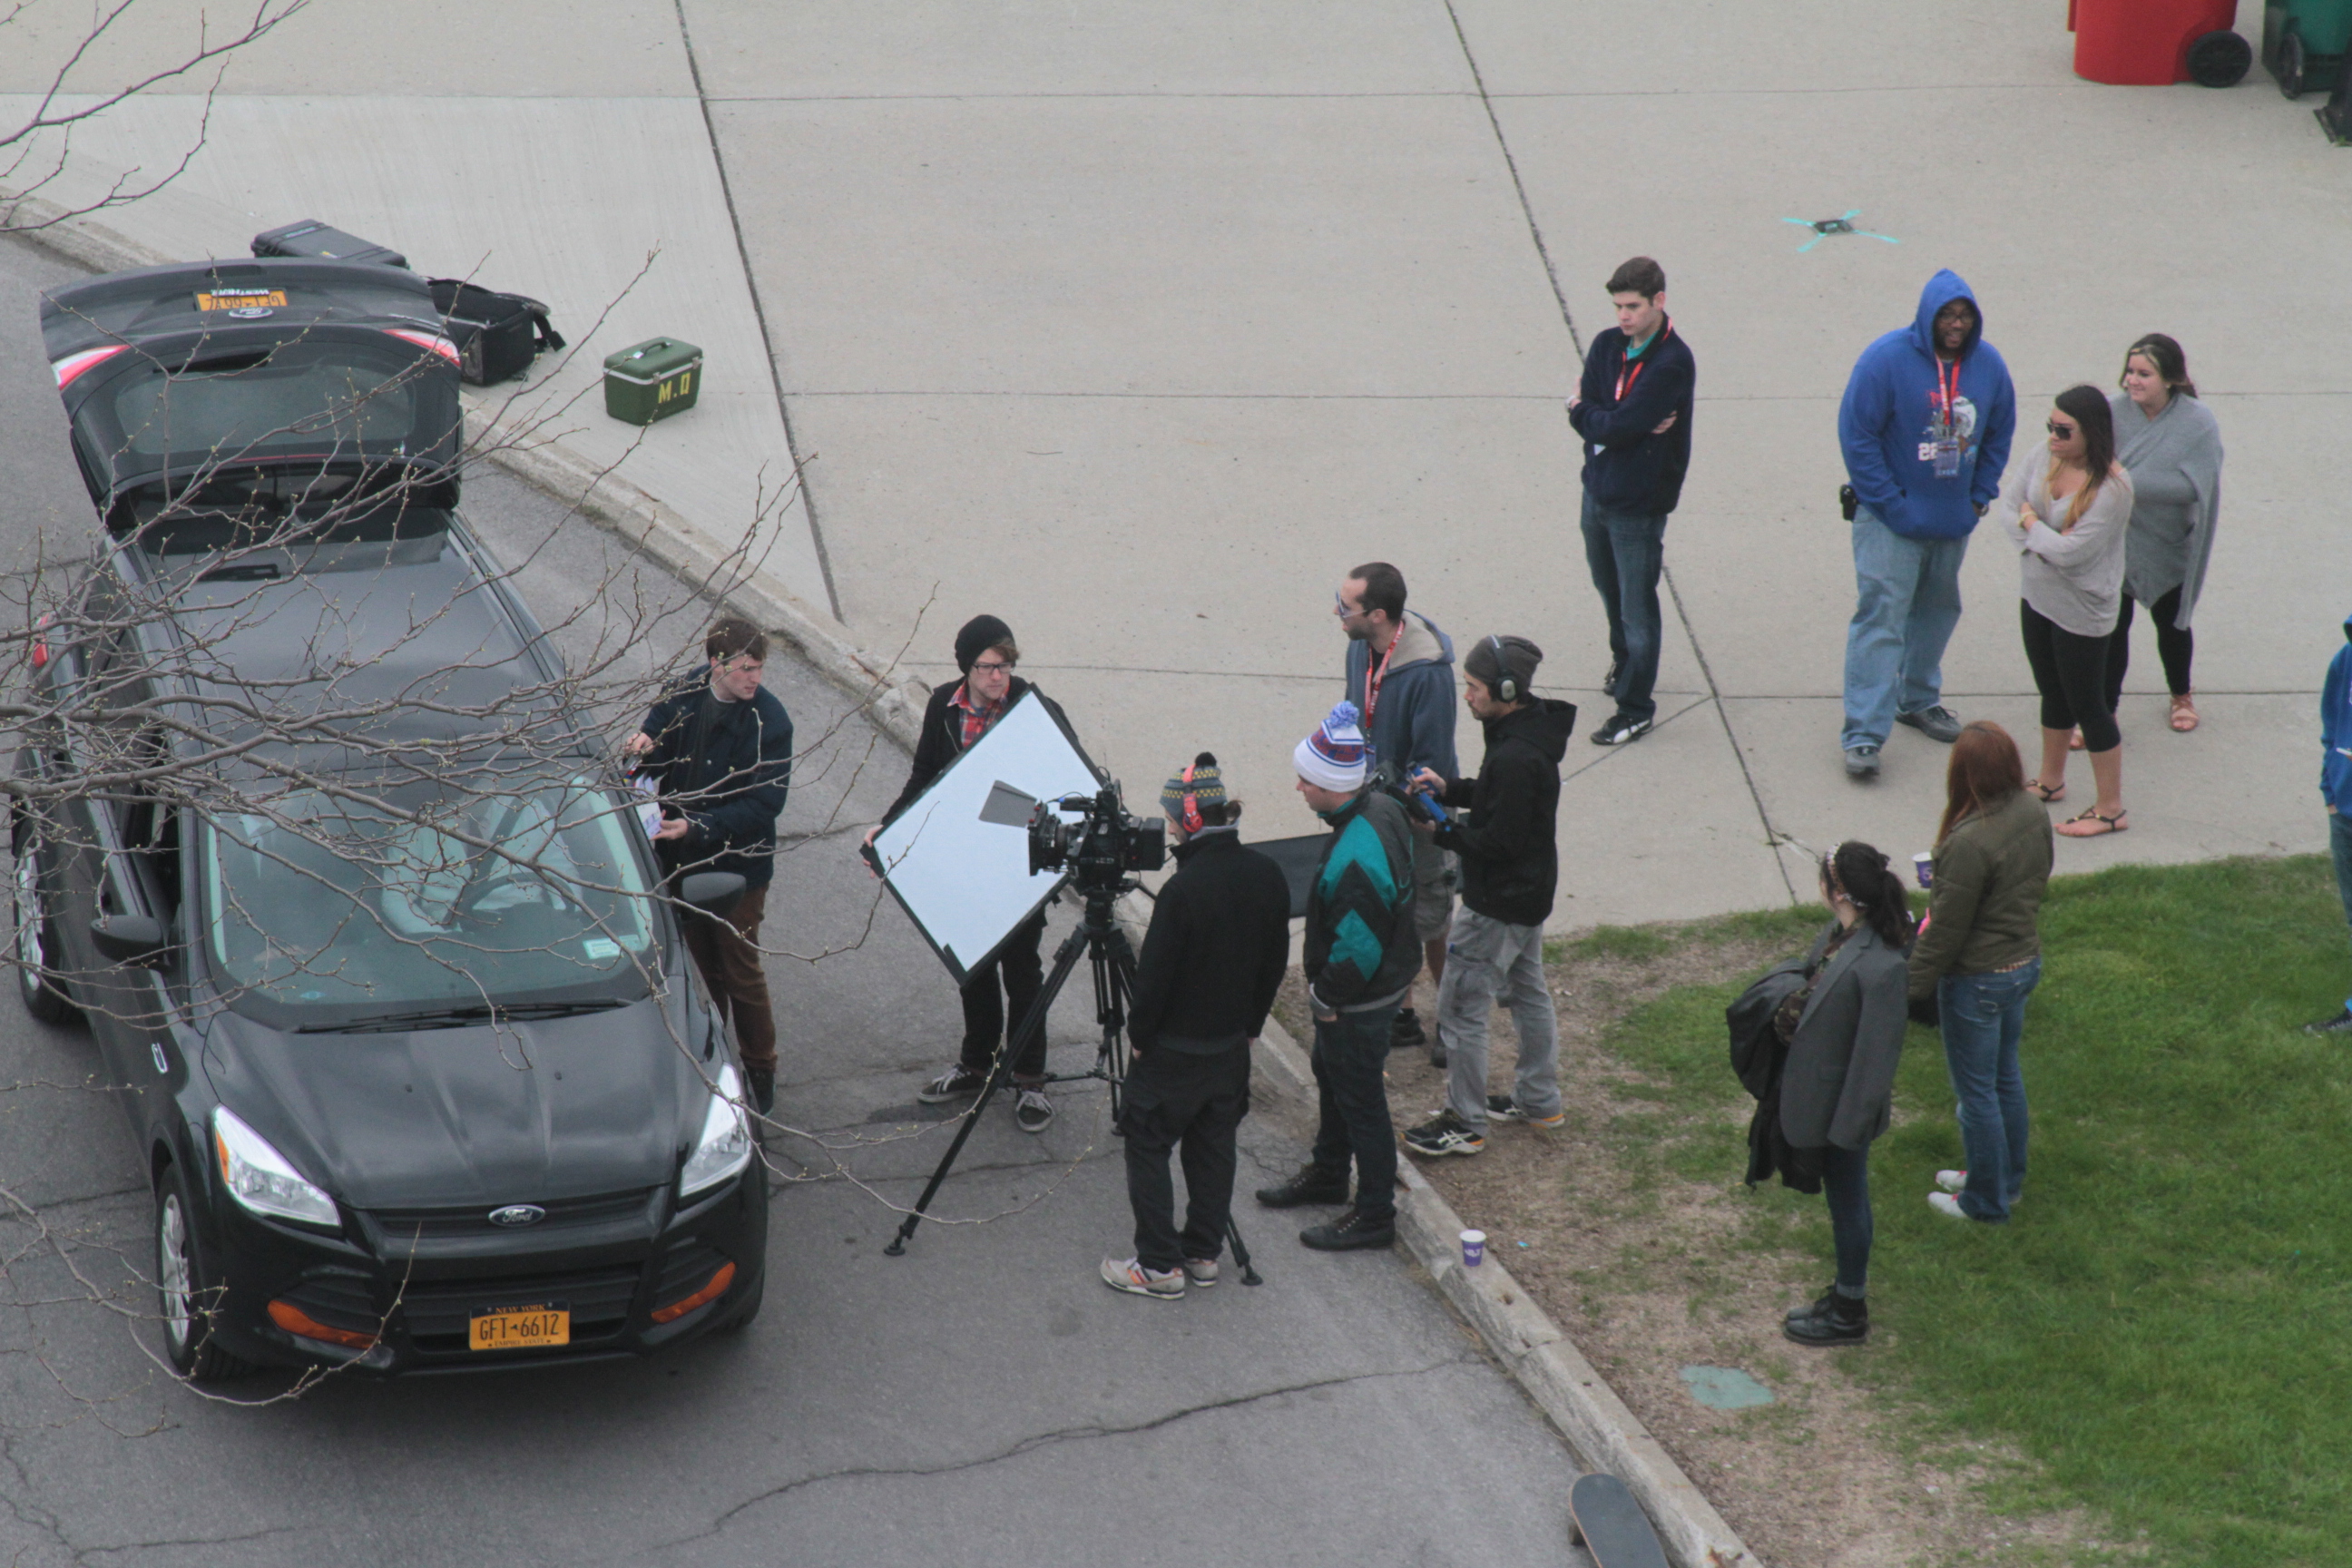  feature film continues shooting through June at various locations around Western New York